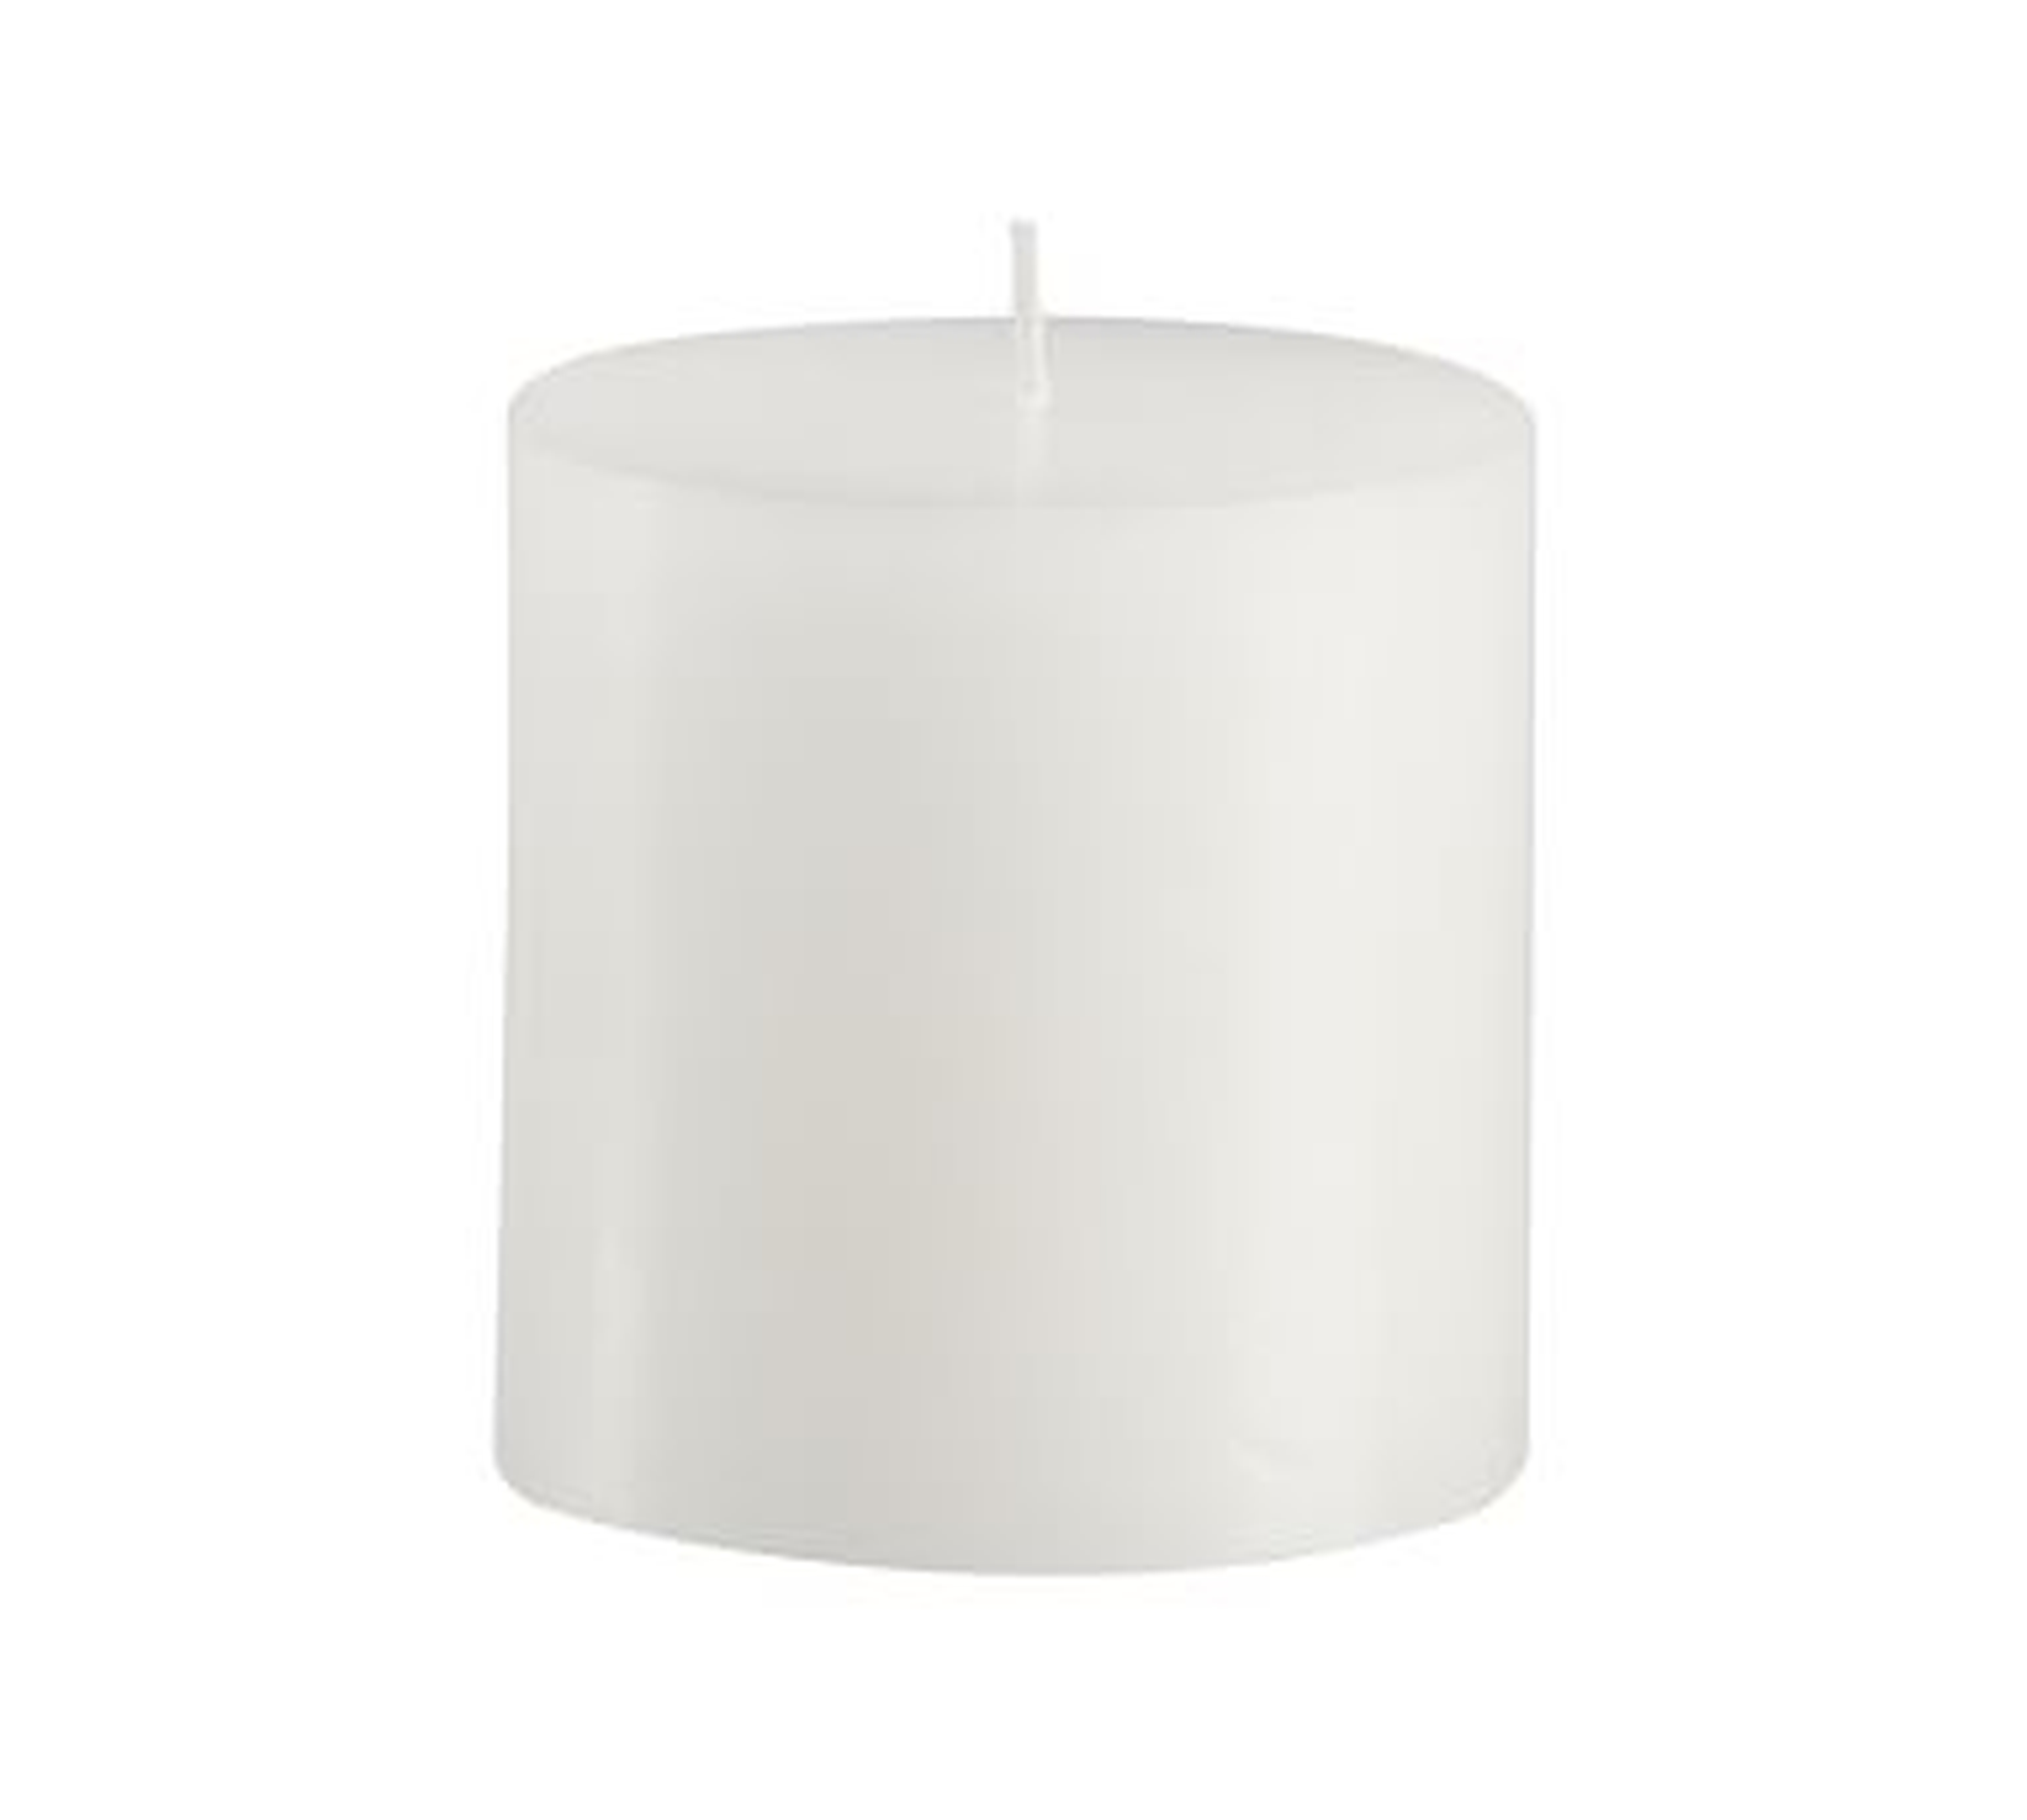 Unscented Pillar Candles, White - 3 x 3 - Pottery Barn